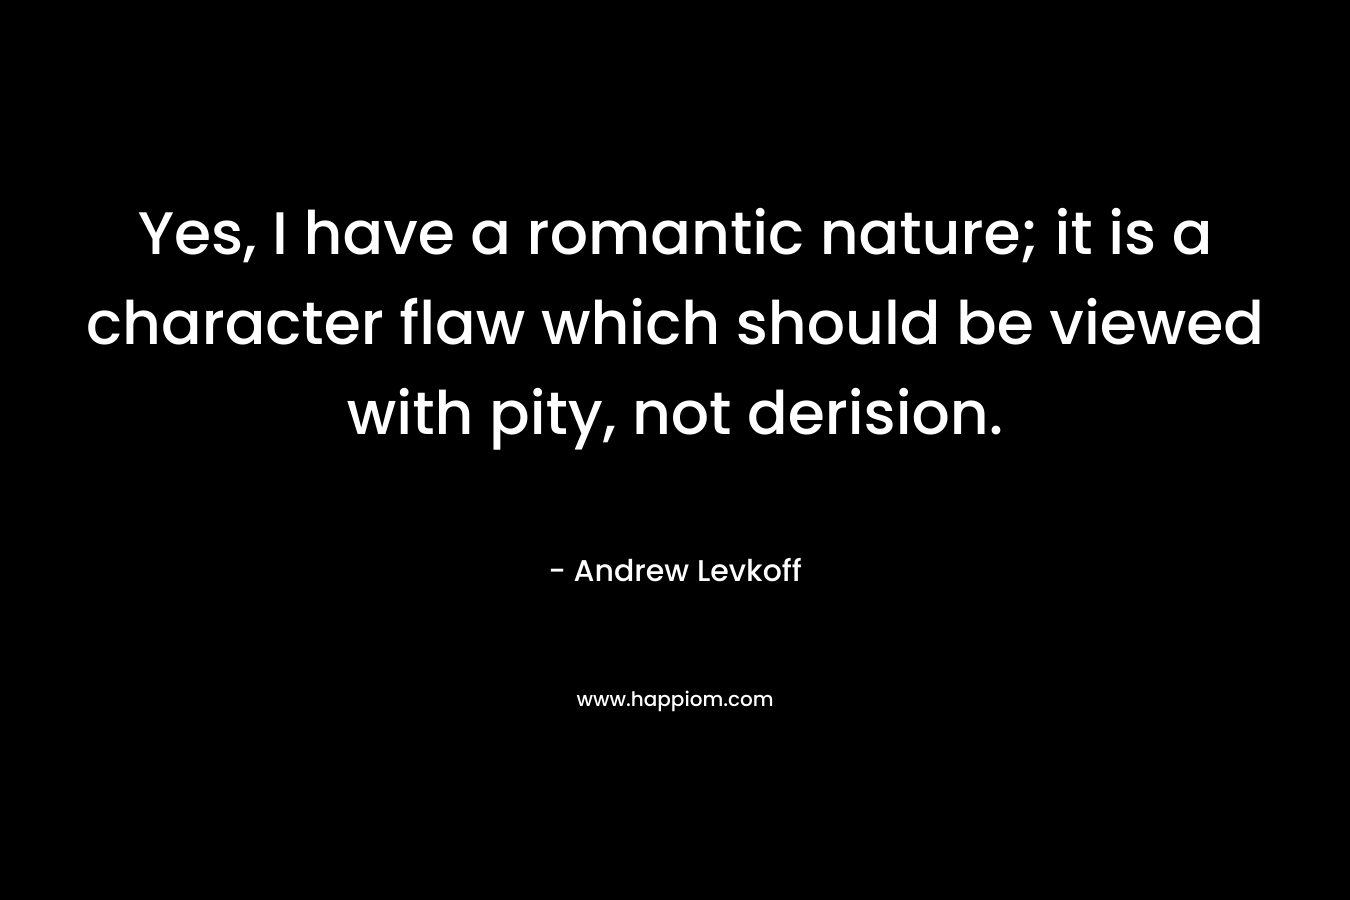 Yes, I have a romantic nature; it is a character flaw which should be viewed with pity, not derision. – Andrew Levkoff